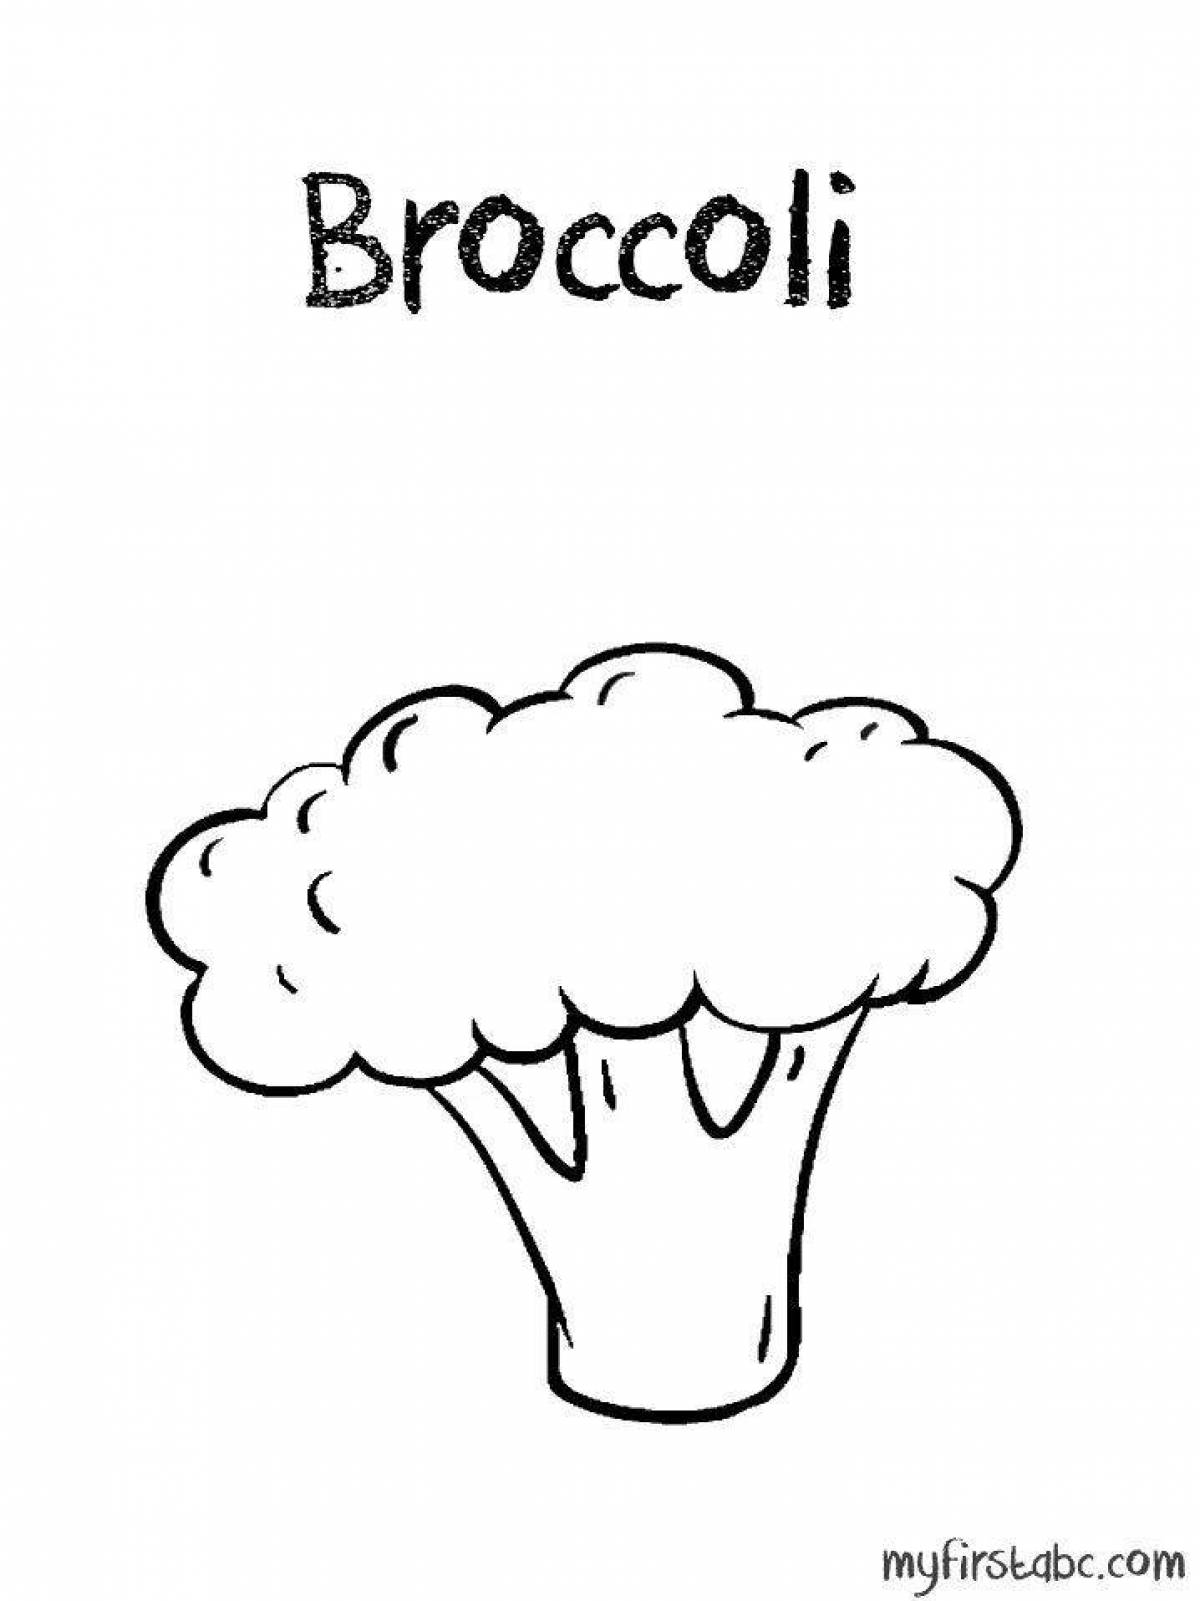 Lovely broccoli coloring page